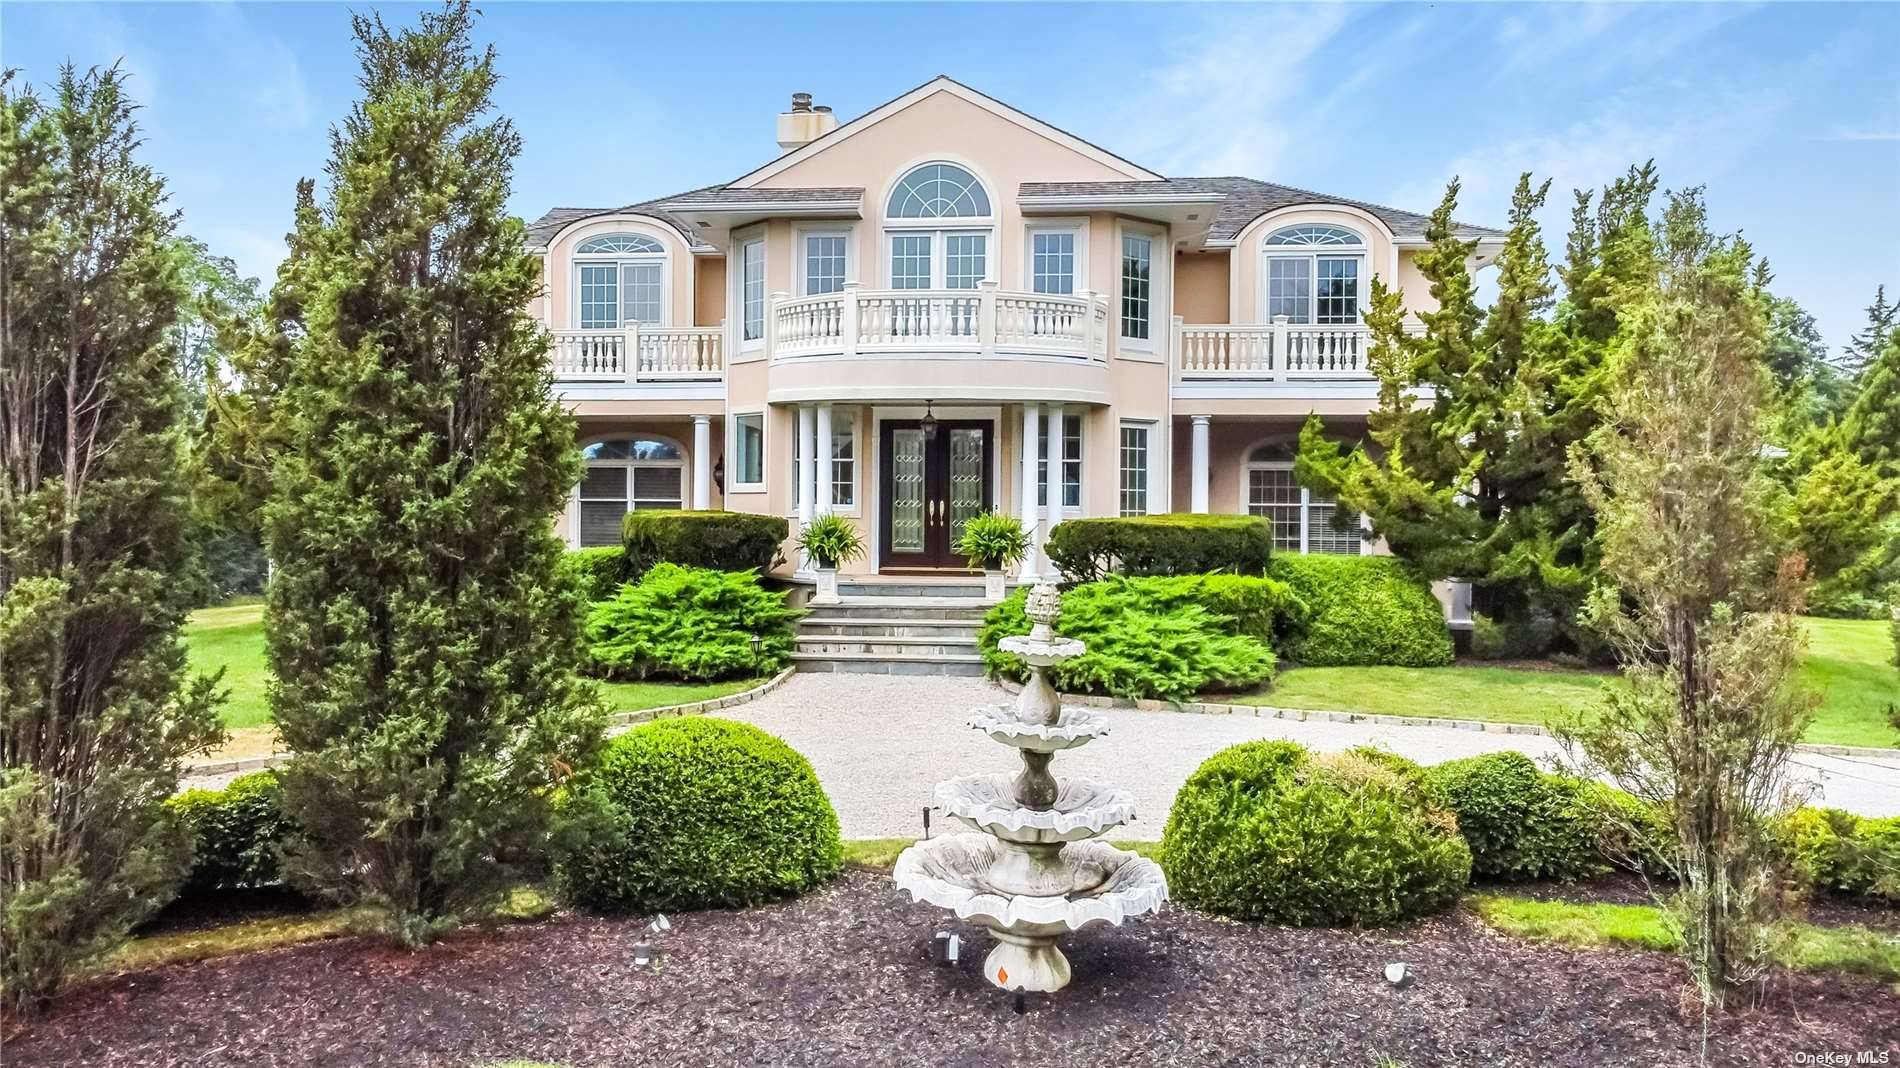 Nestled in the prestigious waterfront community of Remsenburg, this stunning 6000 plus square foot home is perfectly situated on just shy of an acre of gorgeous manicured property.